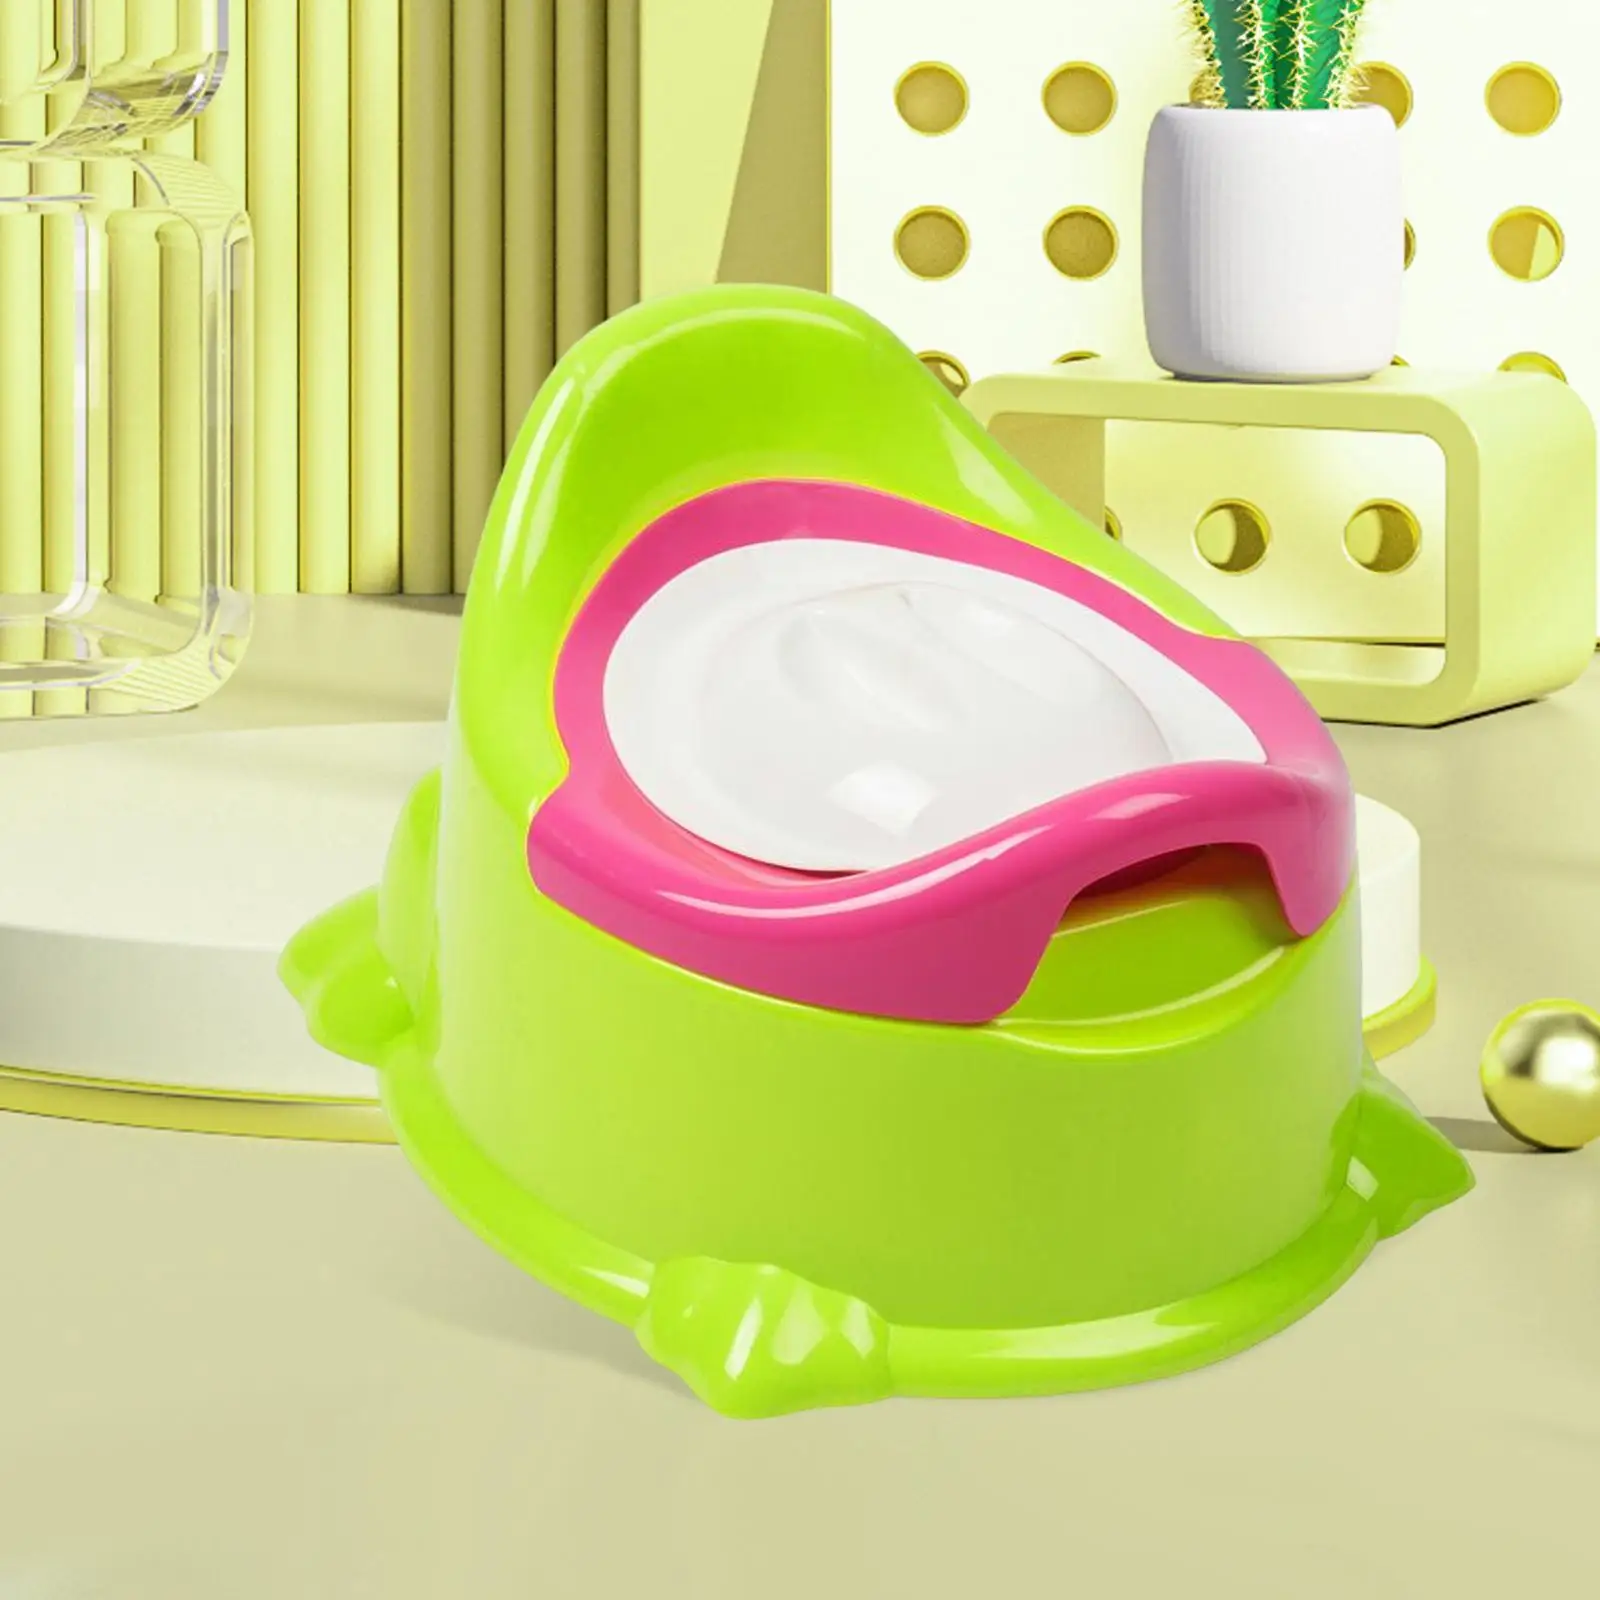 Portable Child Potty Toilet Training Seat Anti Skid Comfortable Stable Easy